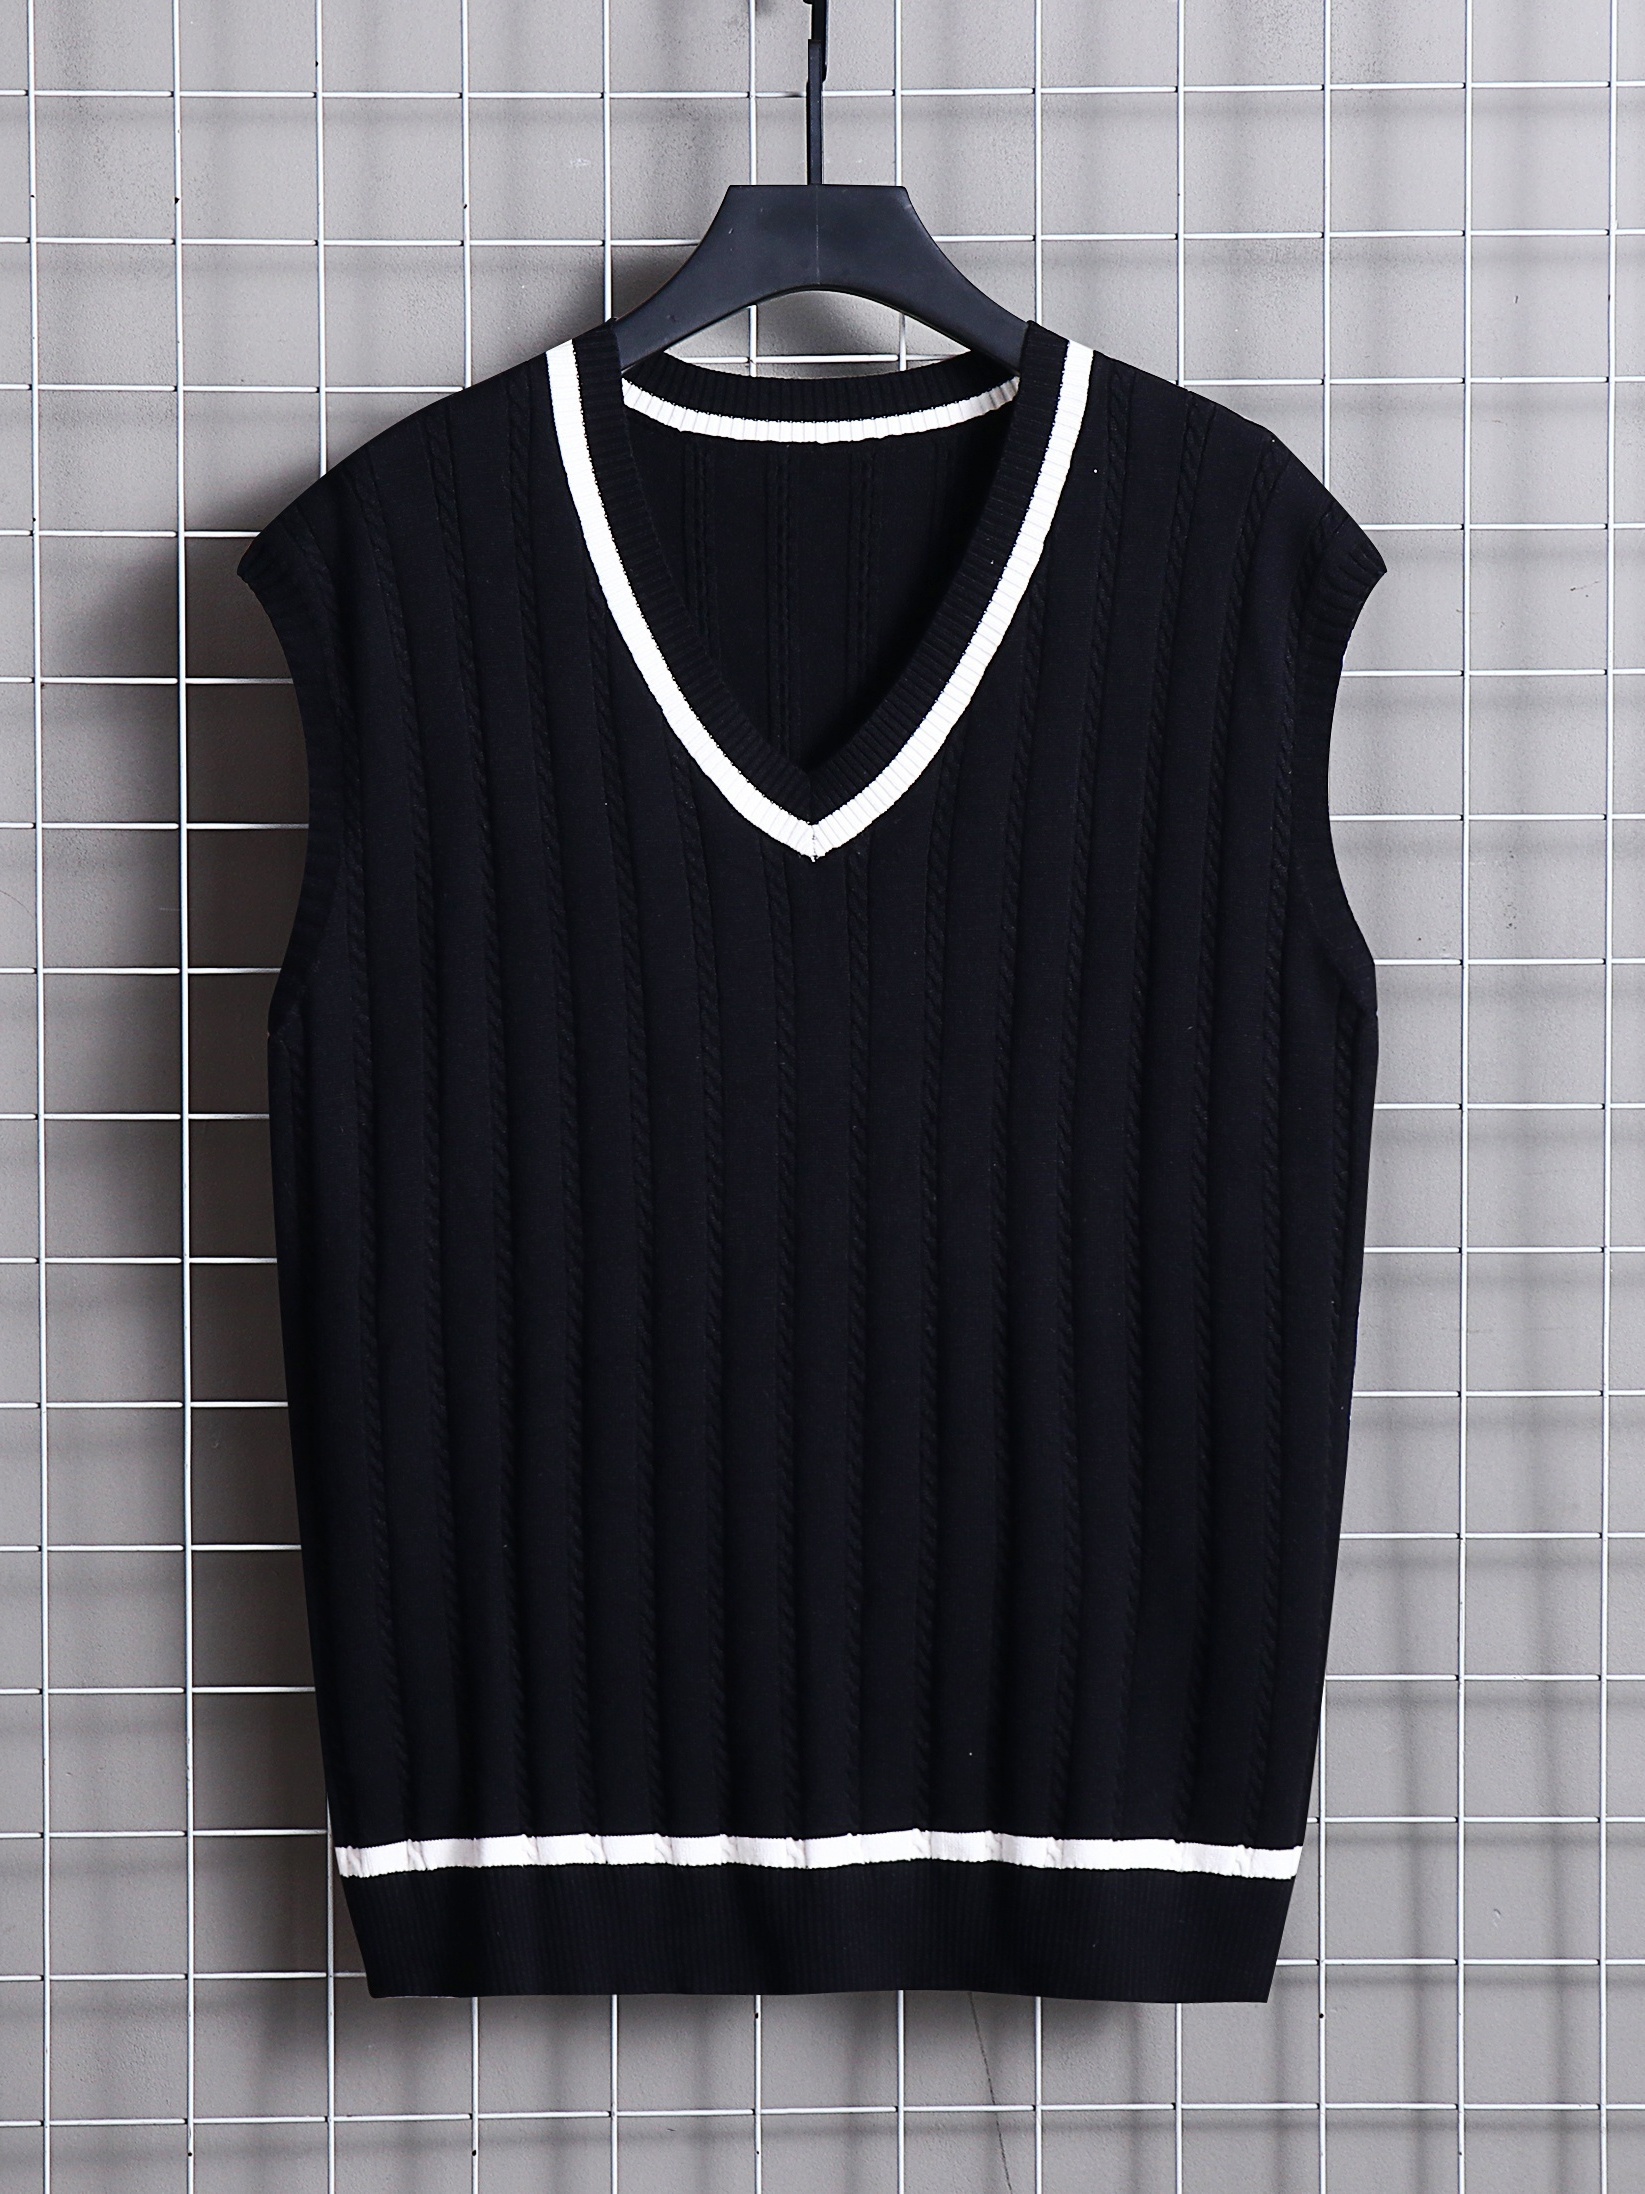 Men Warm Knitted Sweater Vest V-Neck Sleeveless Pullovers Casual Jumper  Knitwear